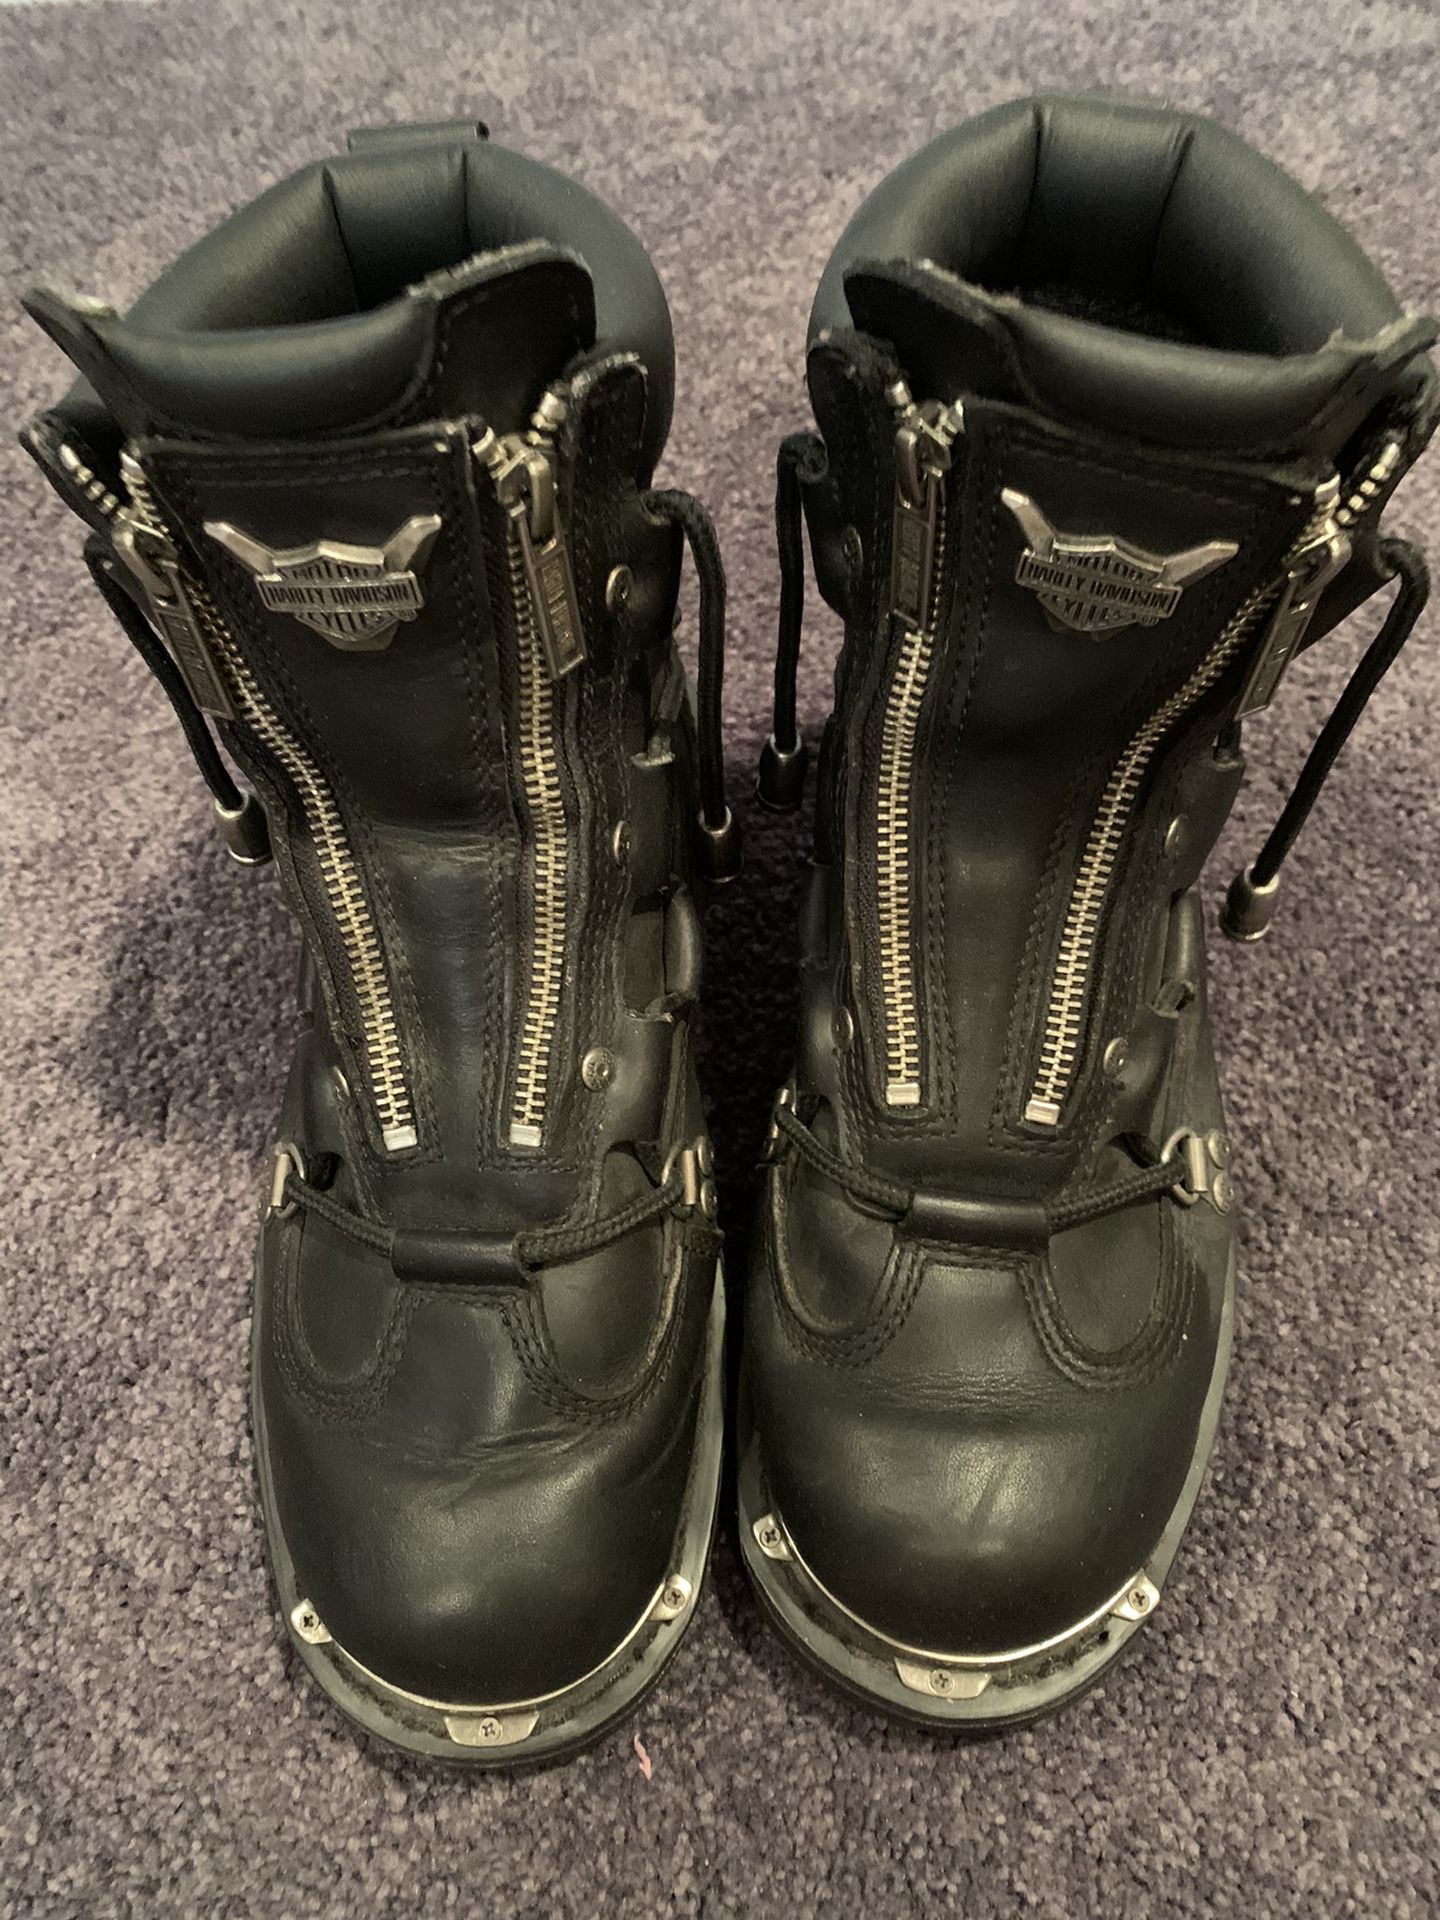 Women’s Harley Boots